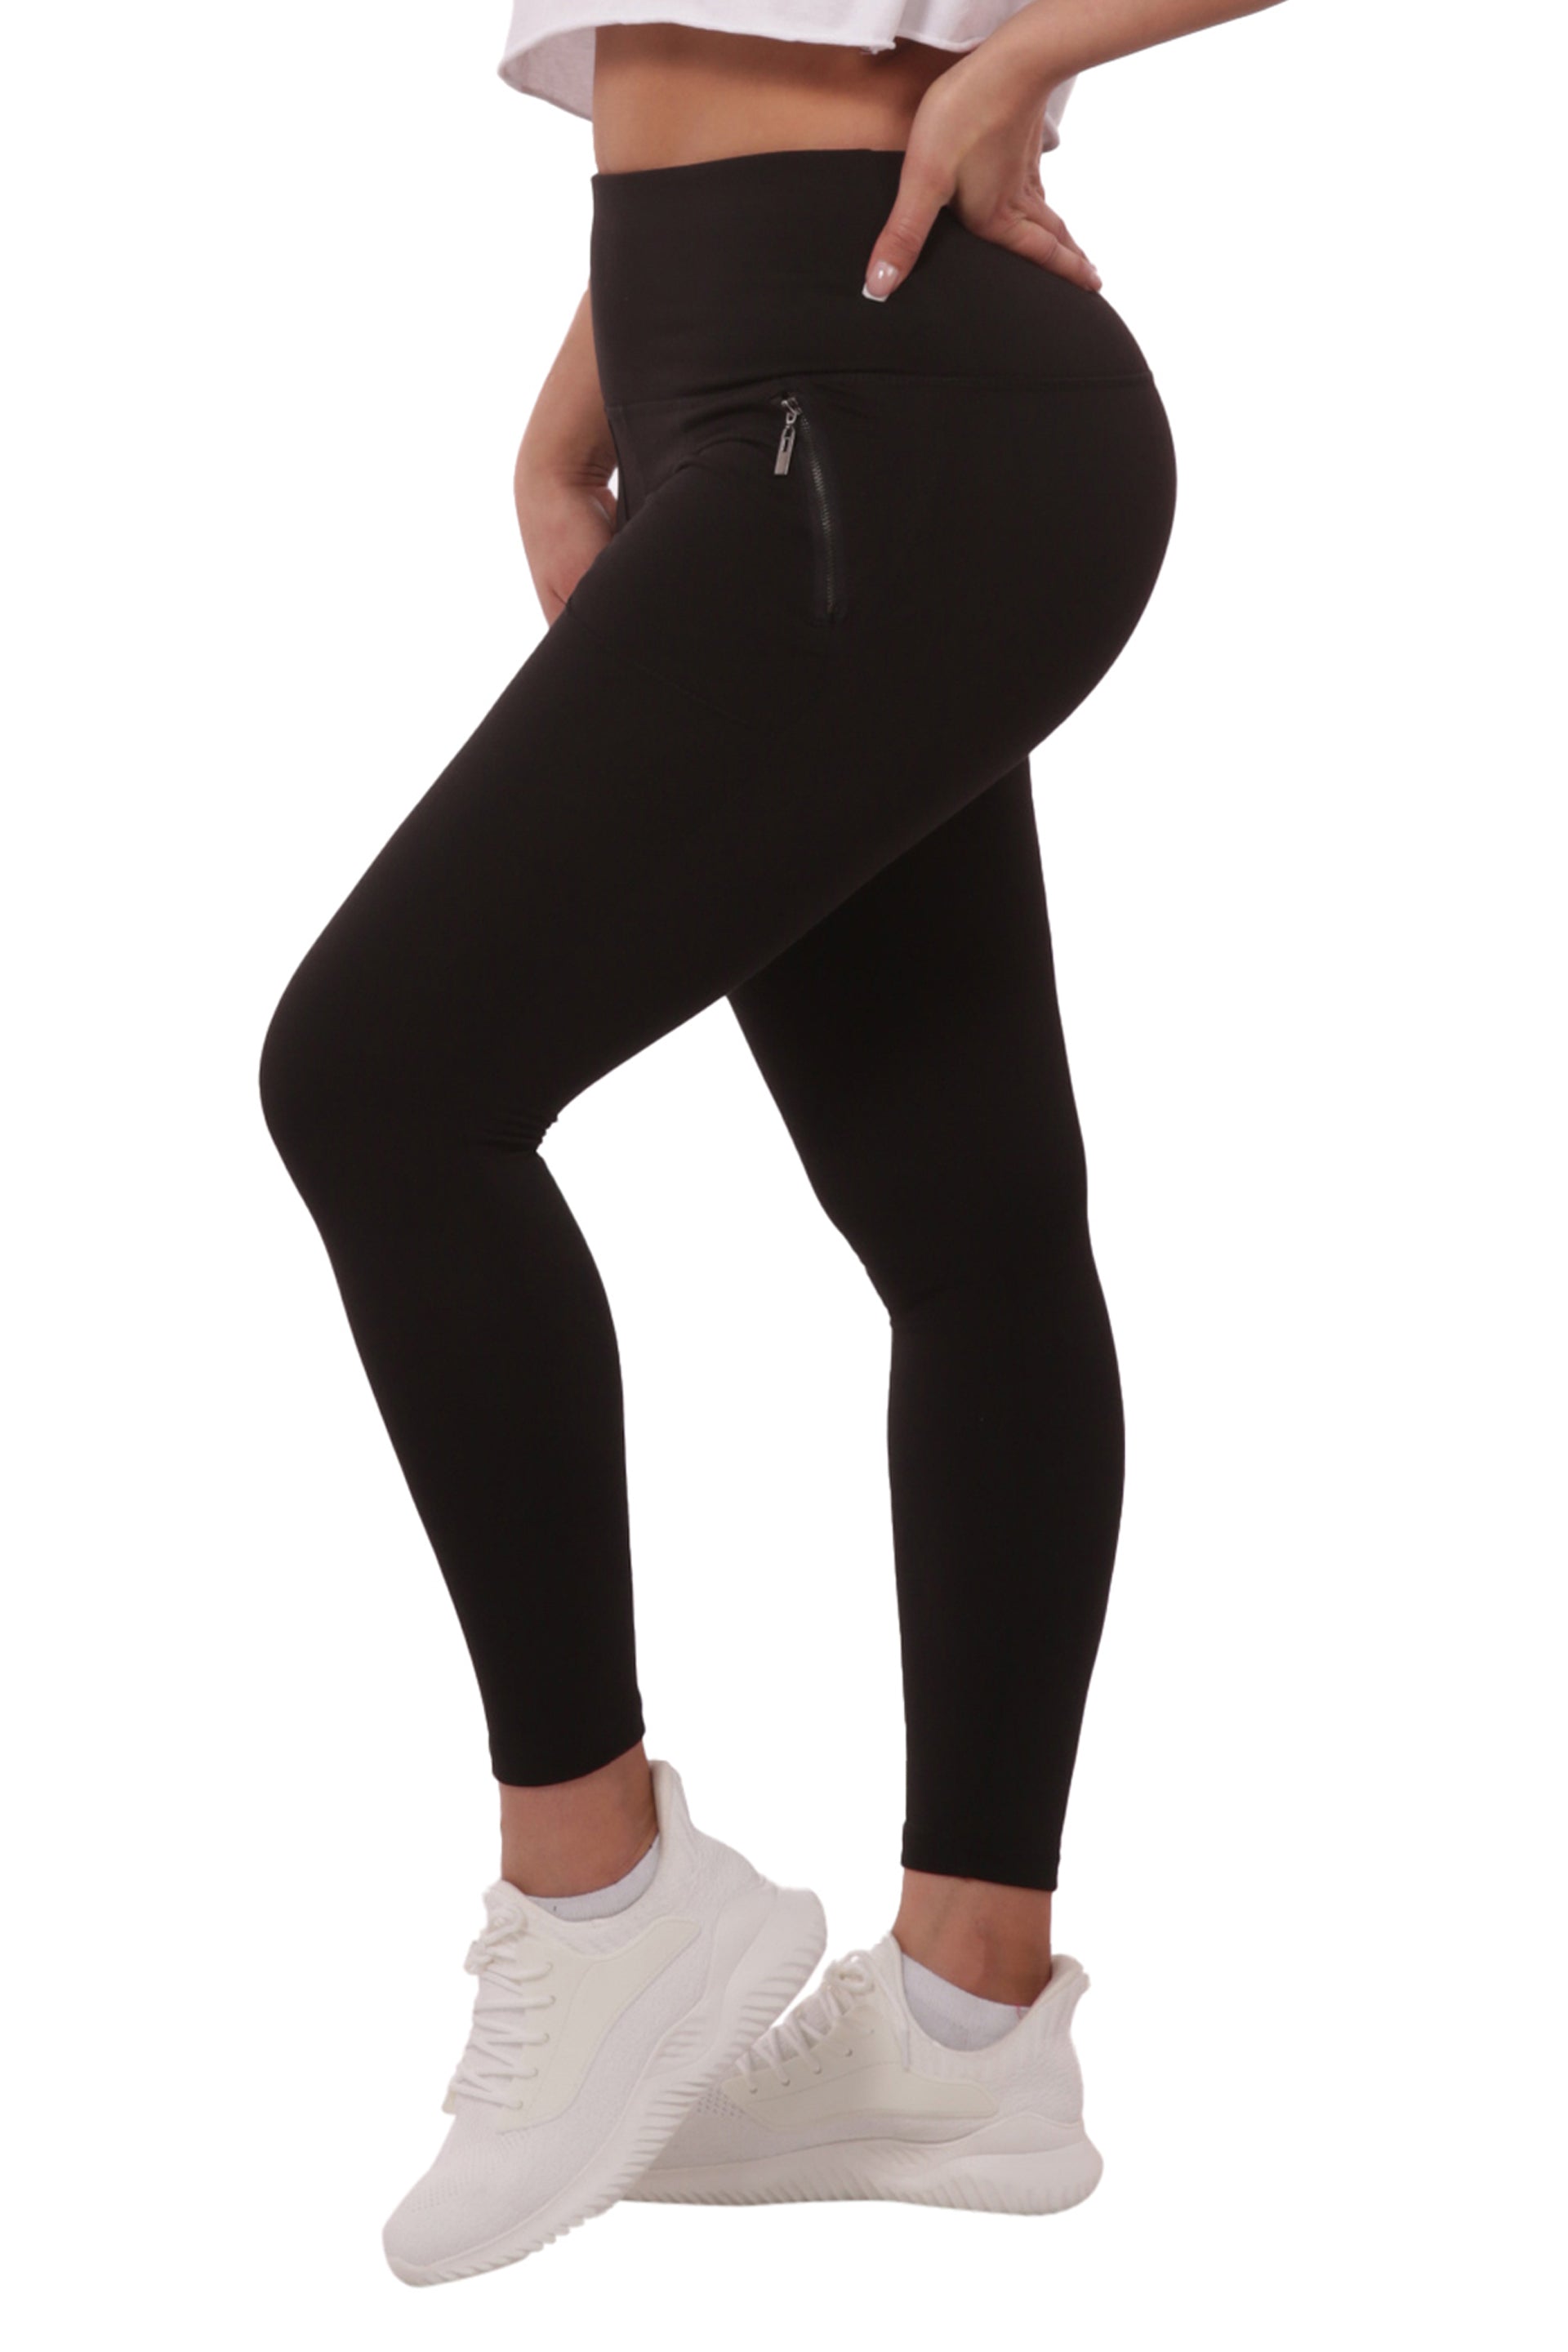 Wholesale Womens High Rise Buttery Soft Leggings With Zipper Pockets - Black - S&G Apparel